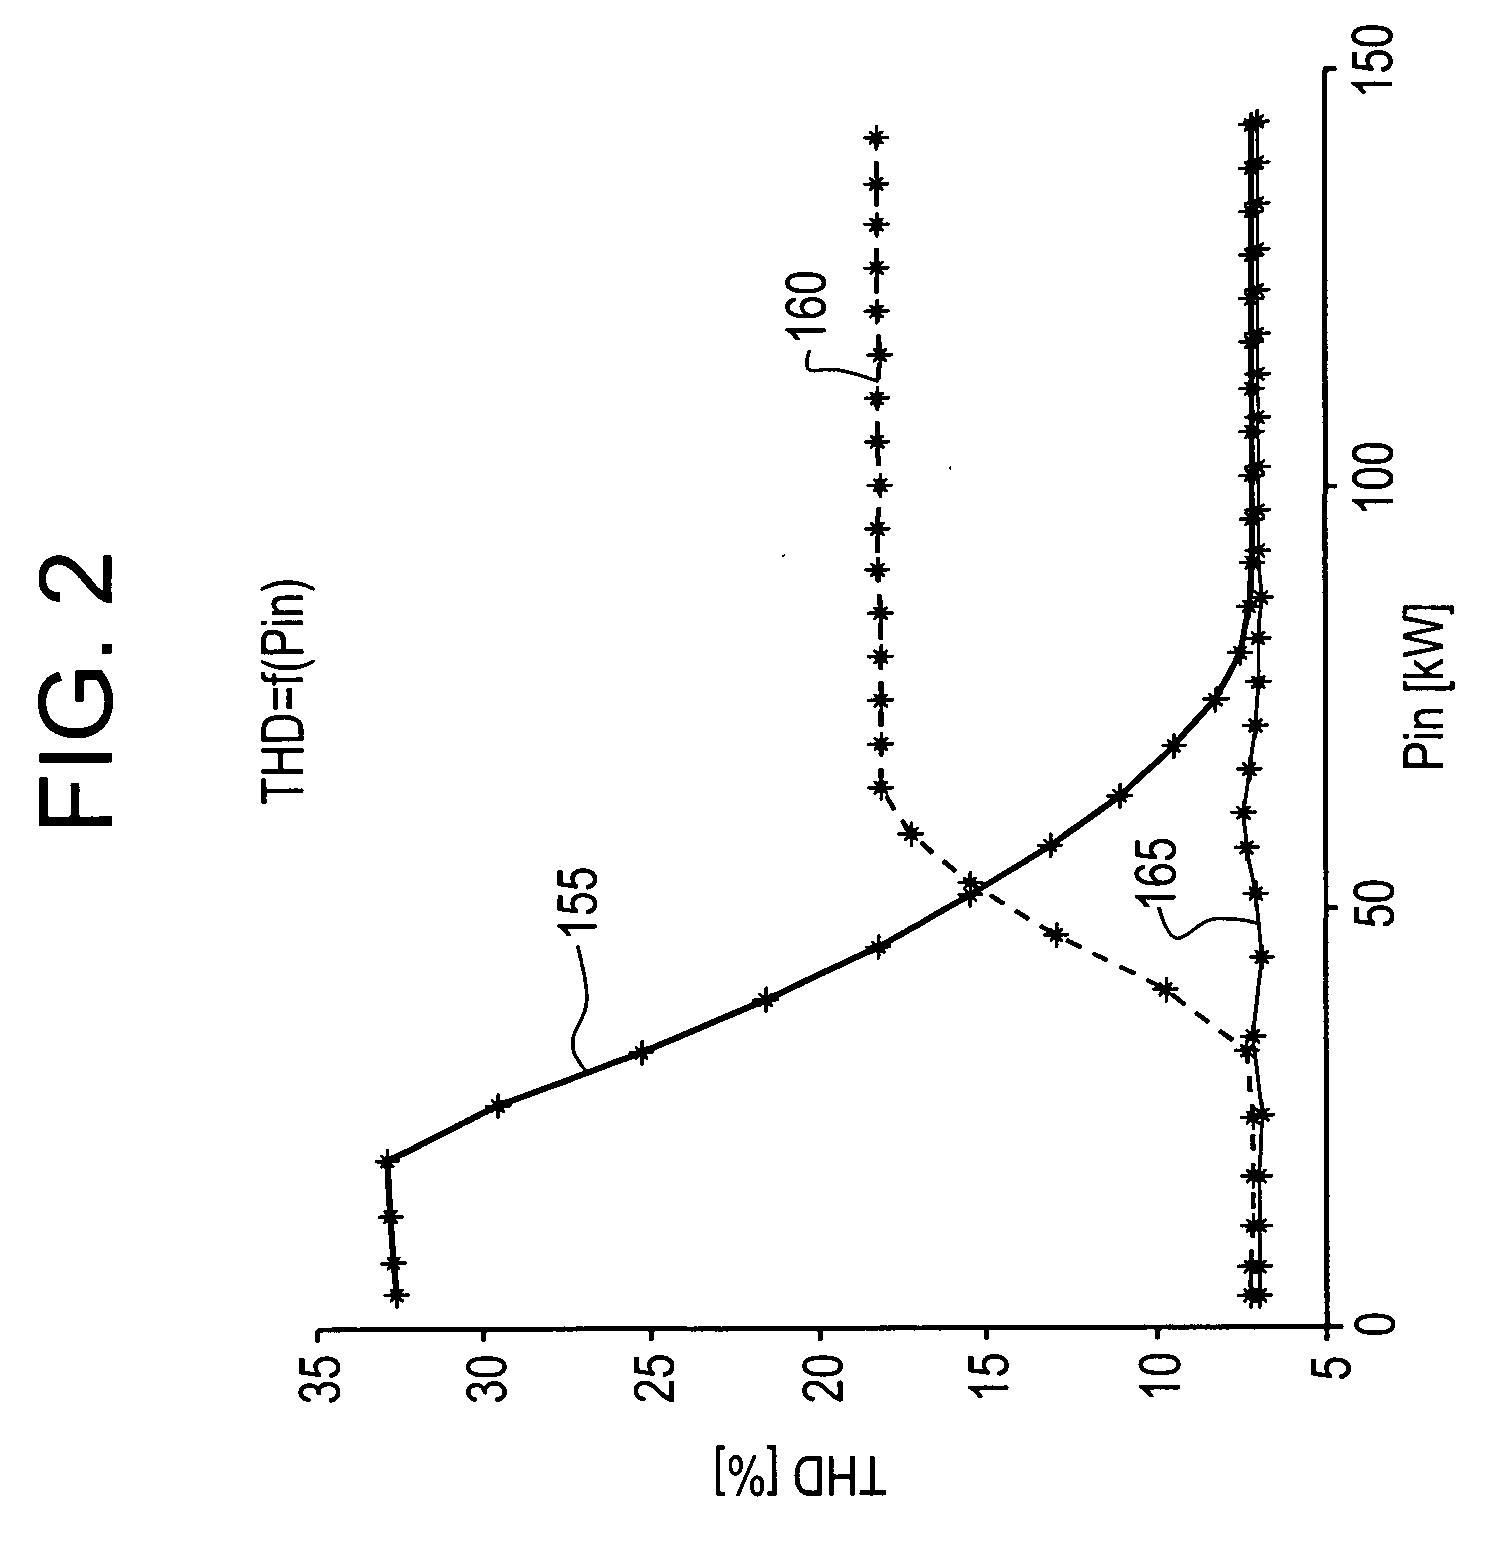 AC/DC converter and method of modulation thereof